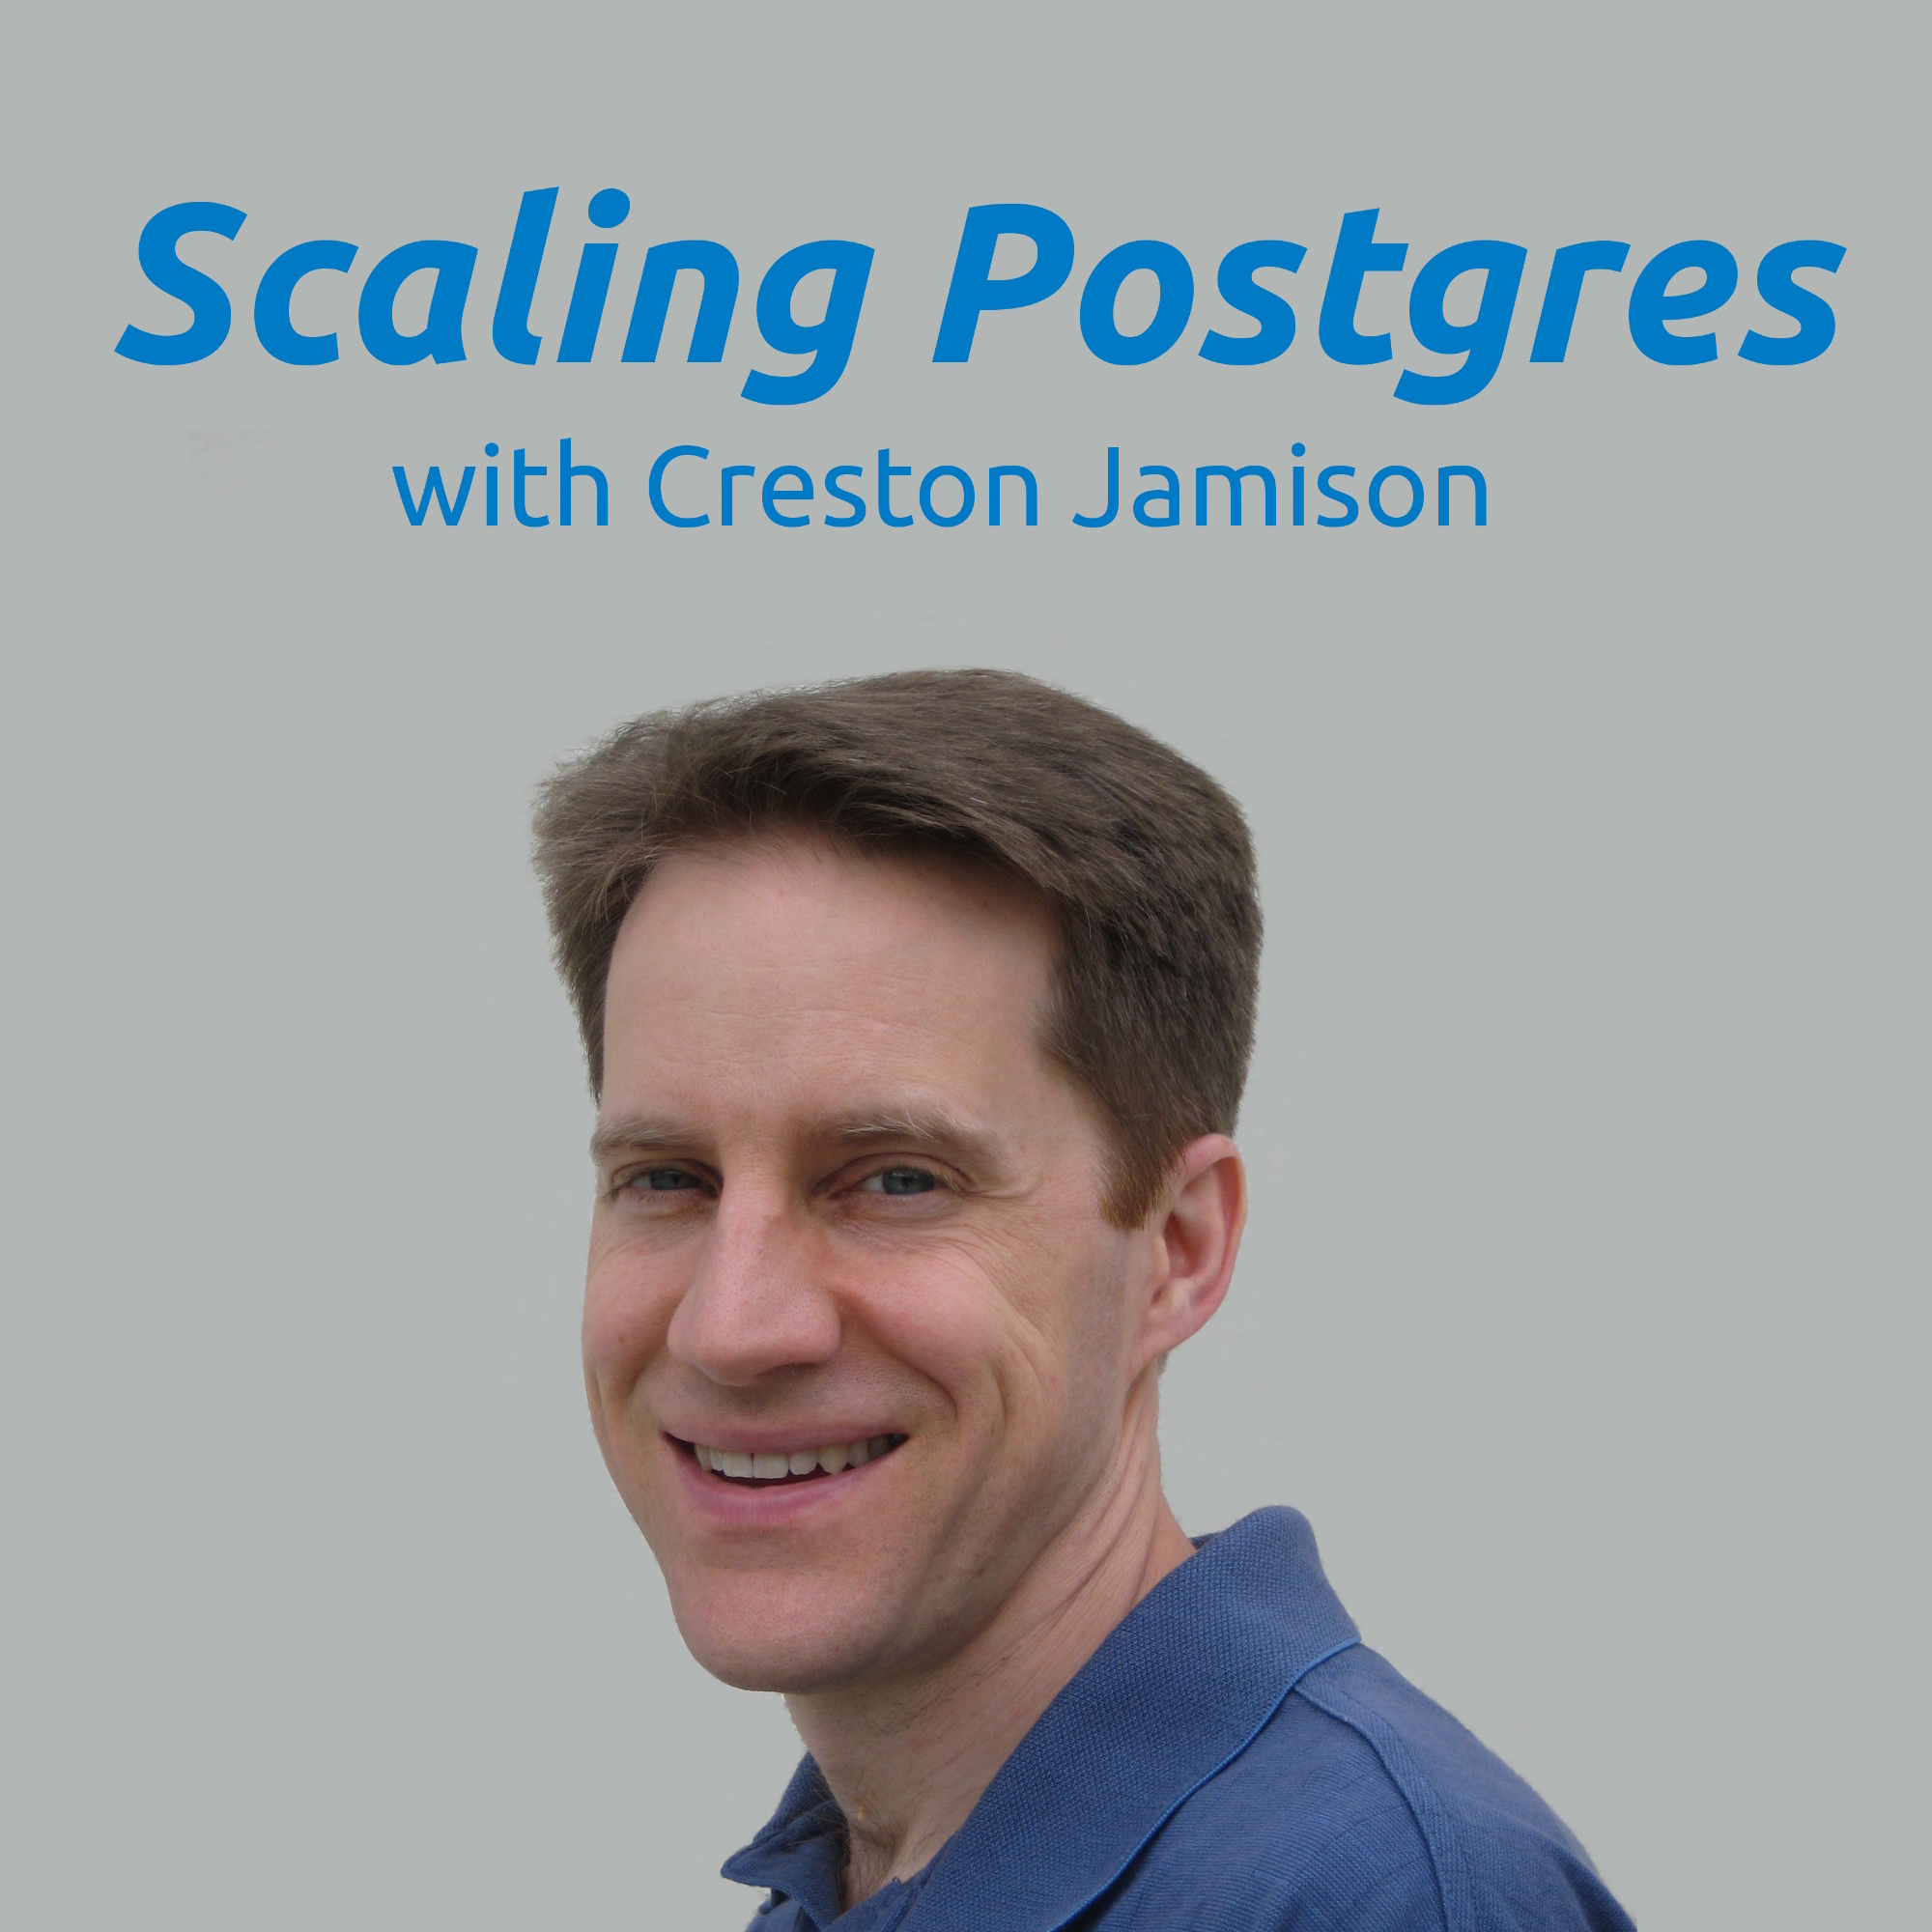 Scaling Real-Time Analytics, Covering Indexes, 1,500 Upgrades | Scaling Postgres 8